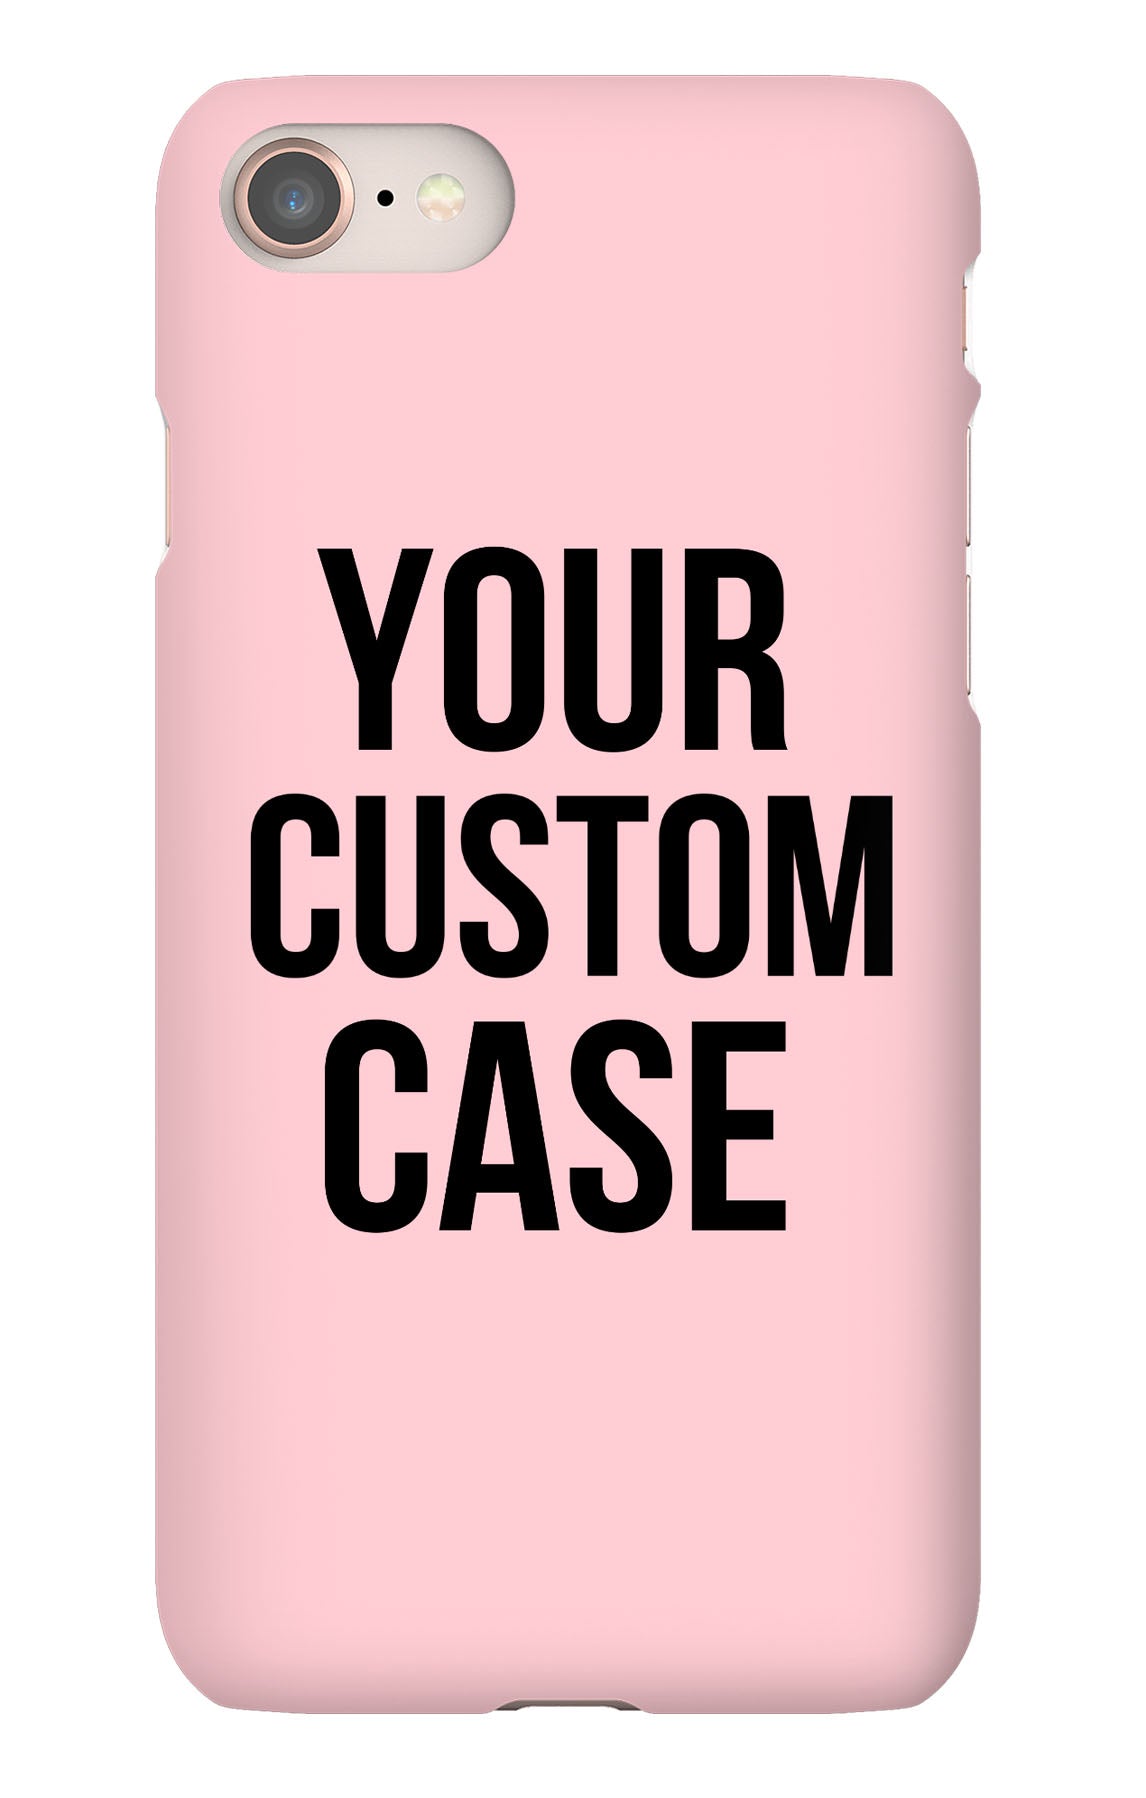 Custom iPhone 8 Slim Case - Your Custom Design in Cart will be Shipped - Pixly Case